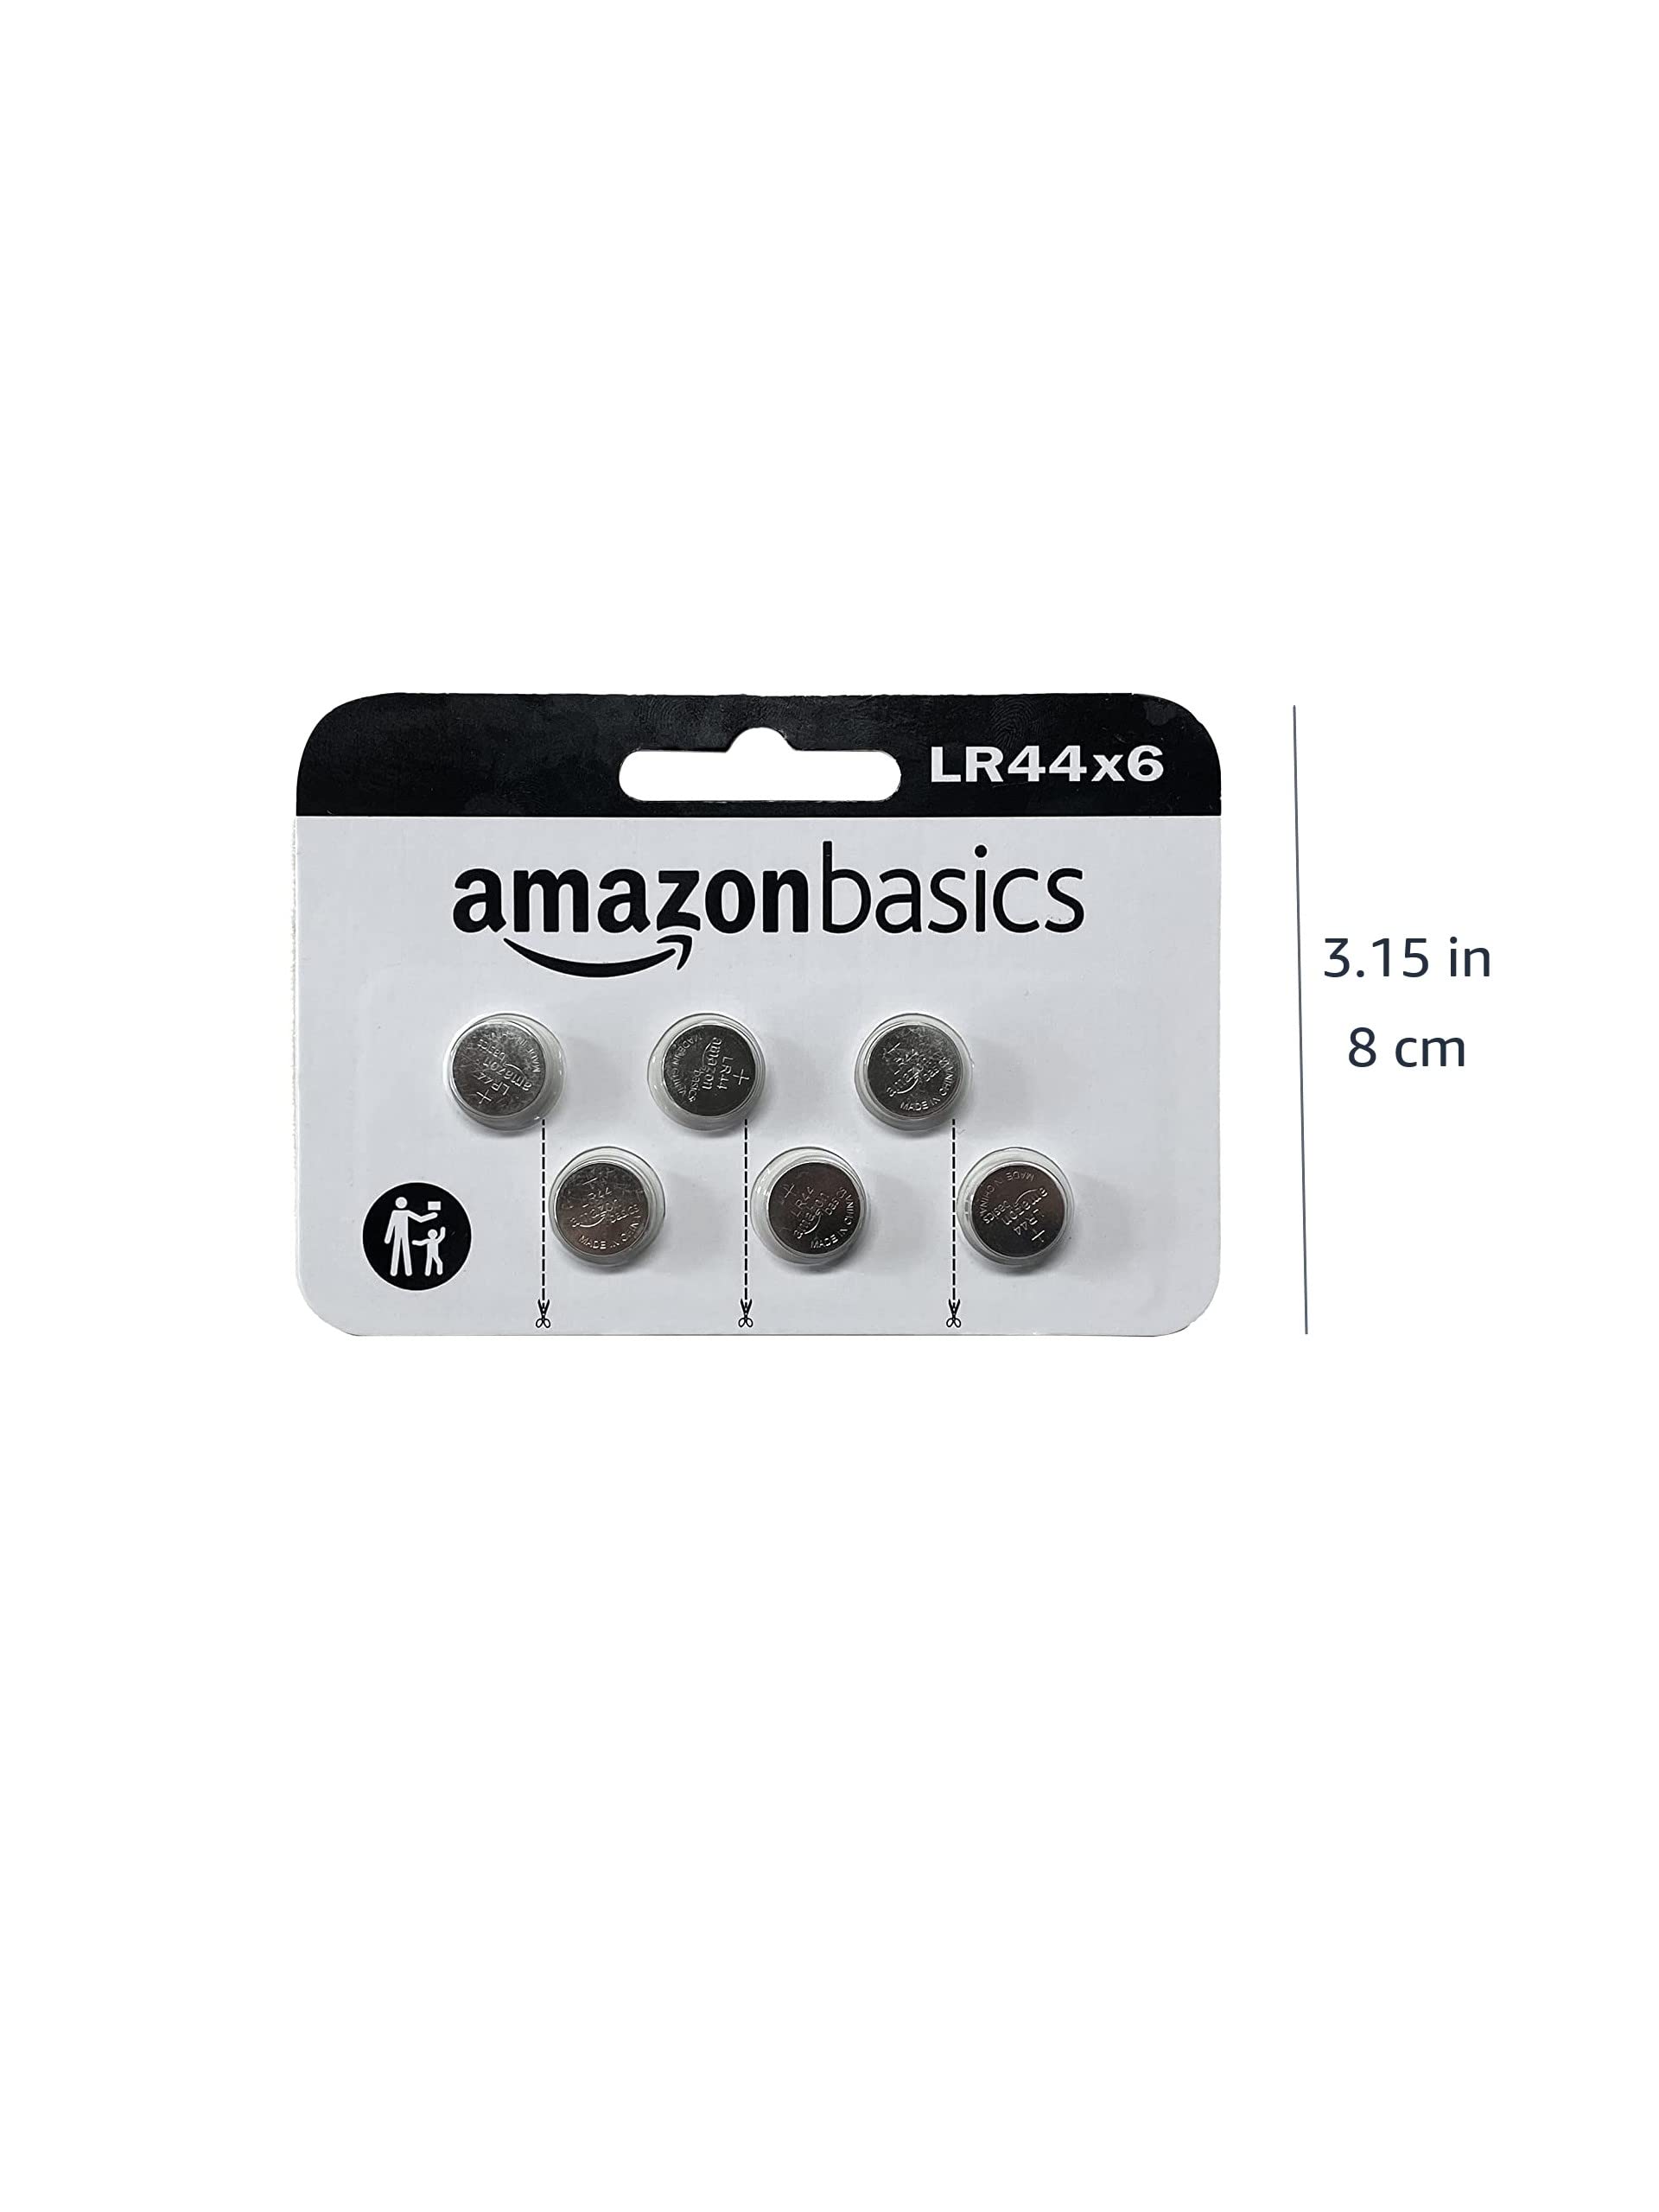 Amazon Basics LR44 Alkaline Button Coin Cell Battery, 1.5 Volt, Long Lasting Power, Mercury Free - Pack of 6